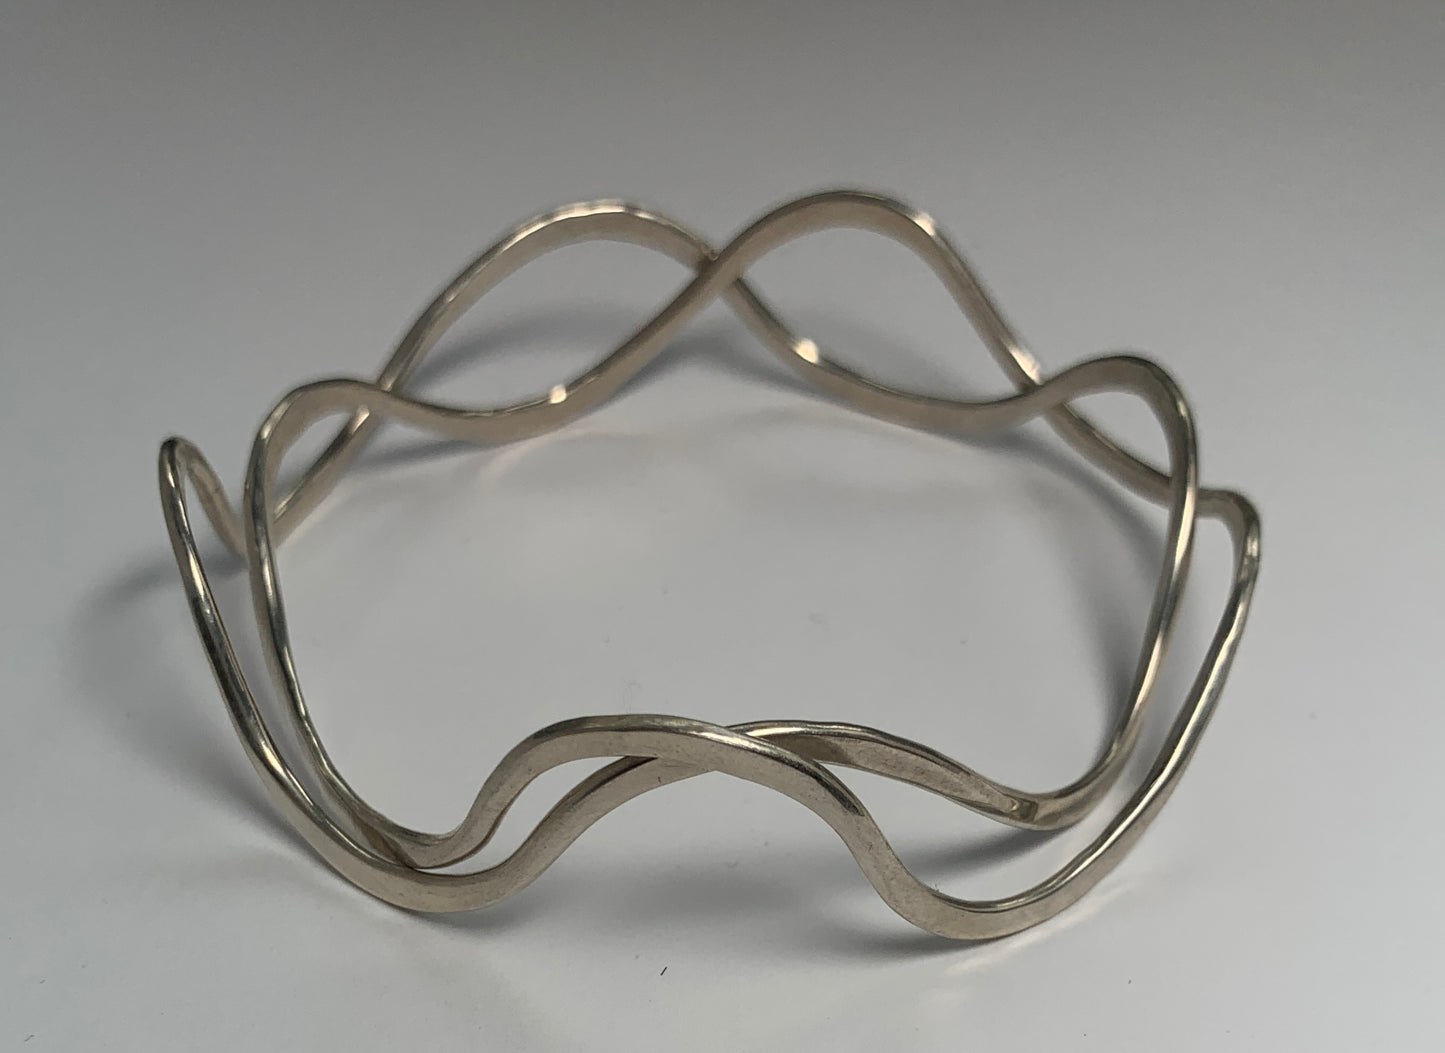 New - “River” Bangles in FAIRMINED Sterling by J Dewey